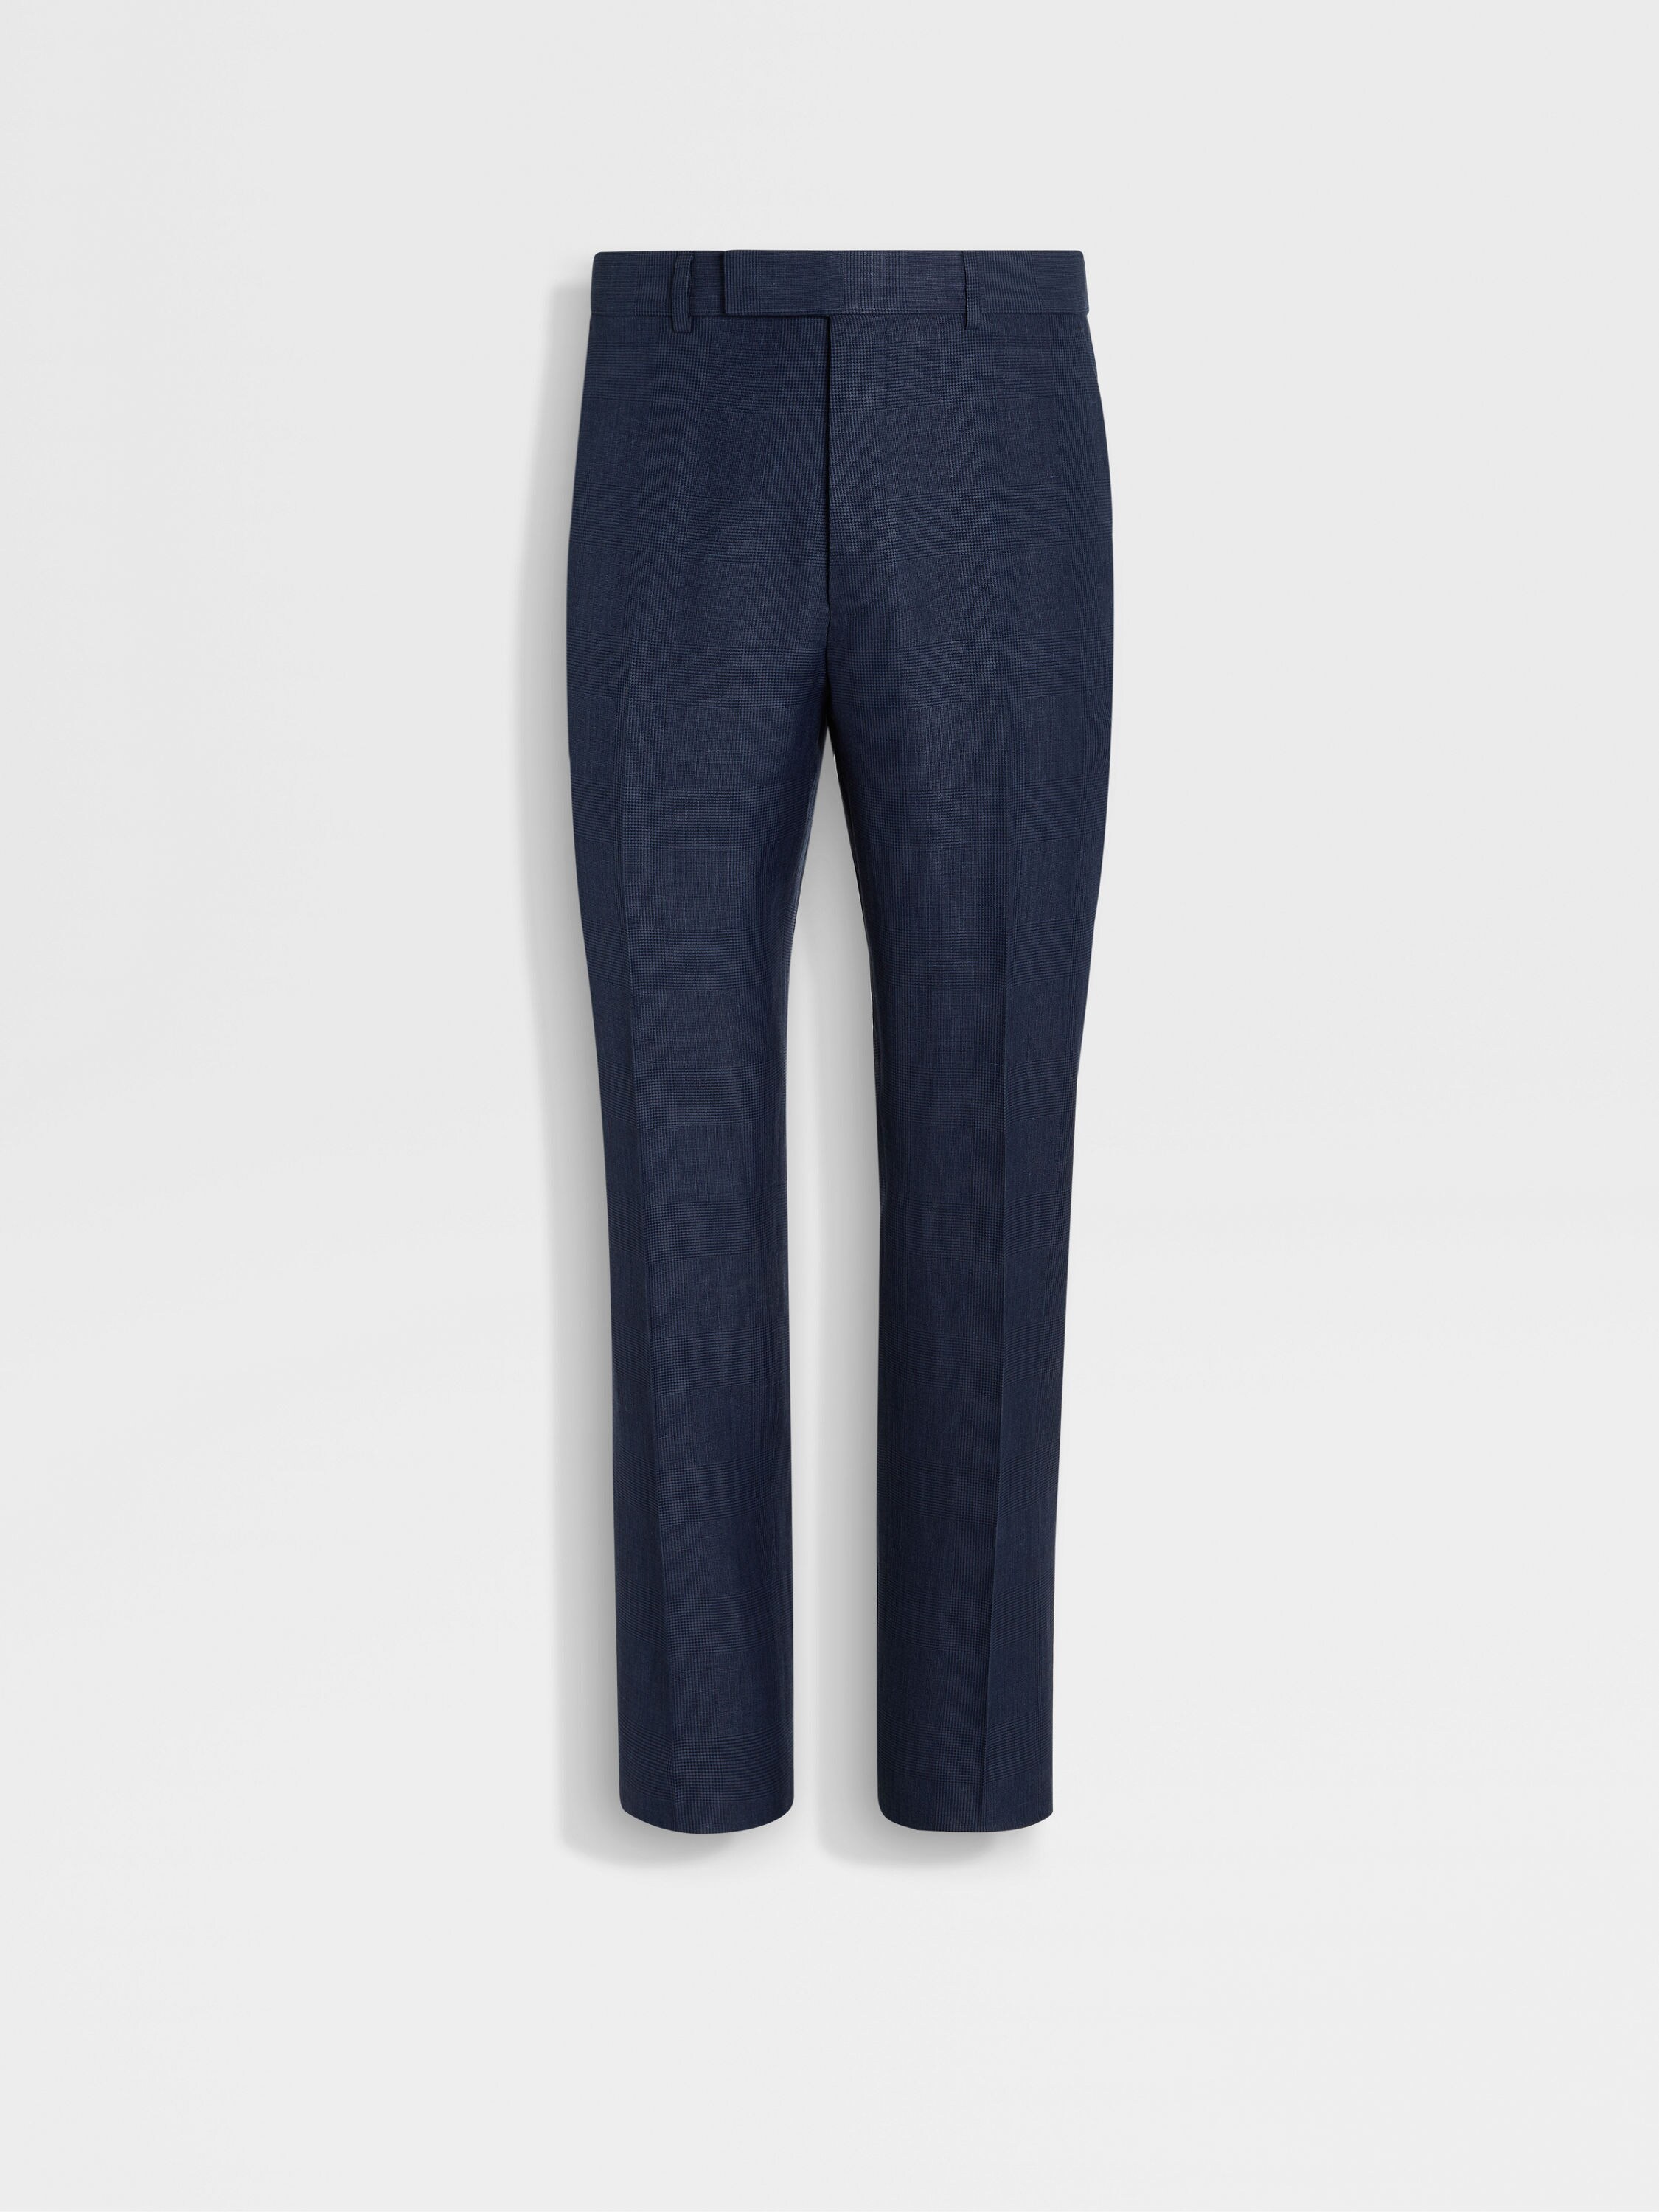 Blue and Navy Blue Crossover Wool Blend Pants